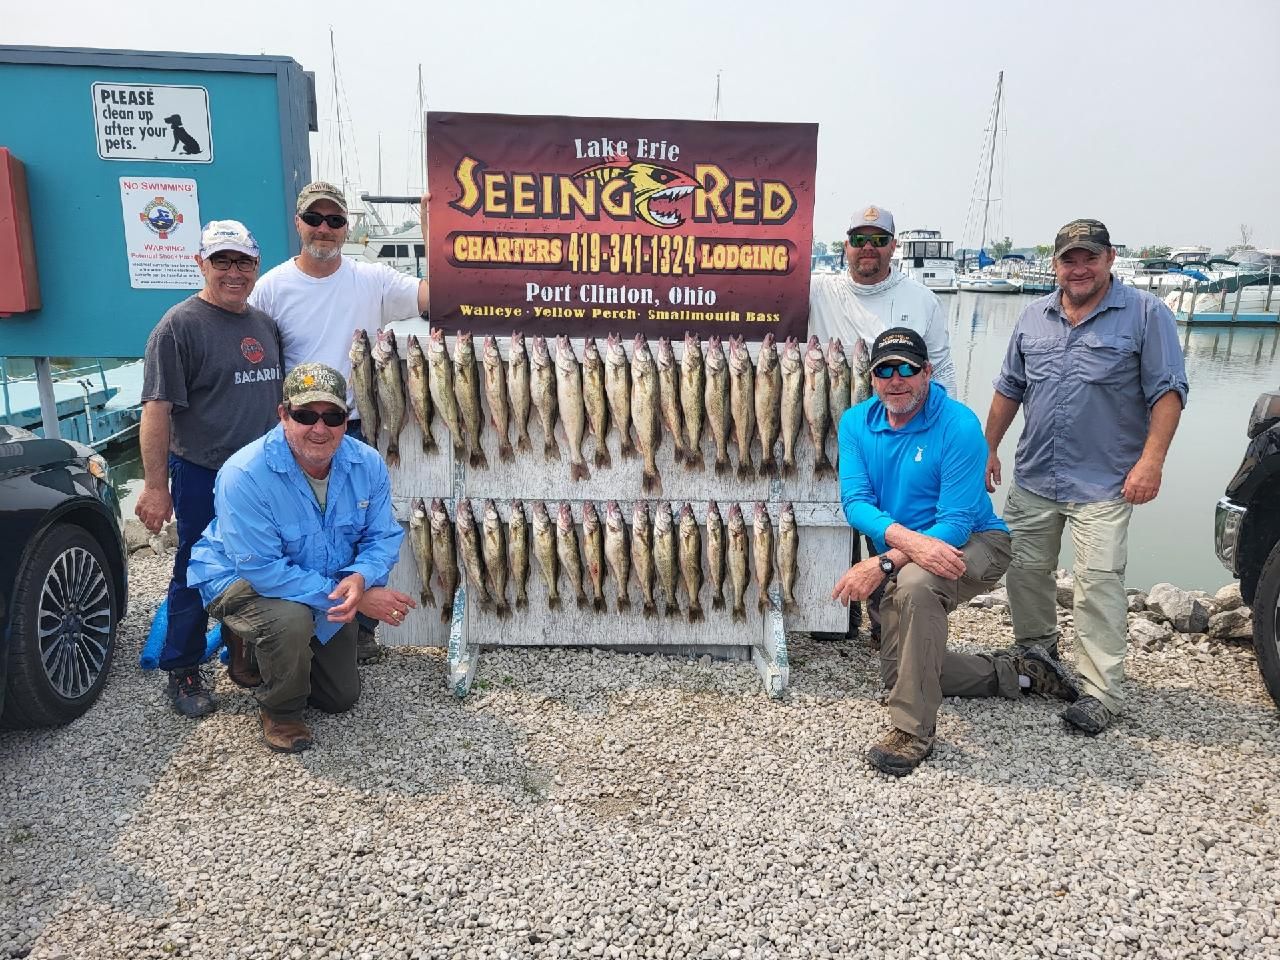 Seeing Red Charters Port Clinton Fishing Charter Lake Erie | Exclusive Charter Trip fishing Lake